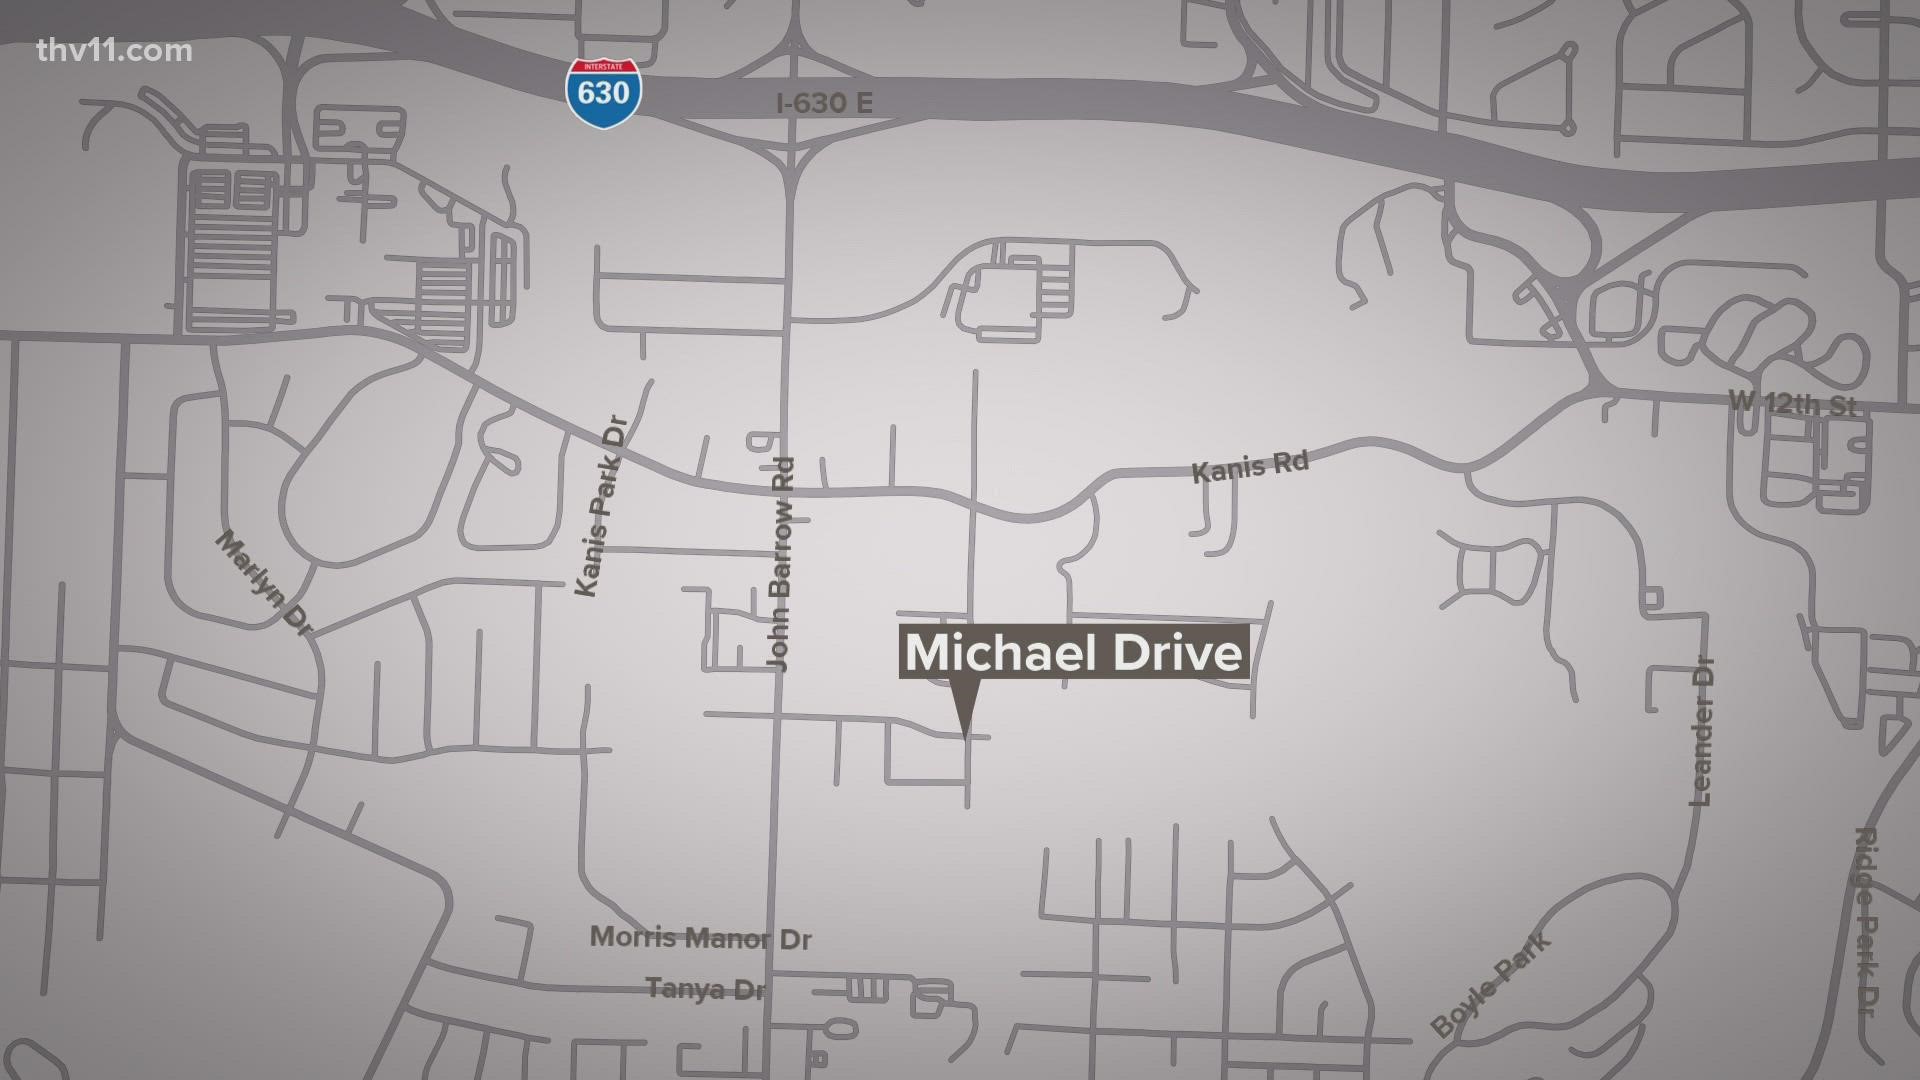 Little Rock police are investigating a homicide that happened overnight in the 1900 block of Michael Drive.